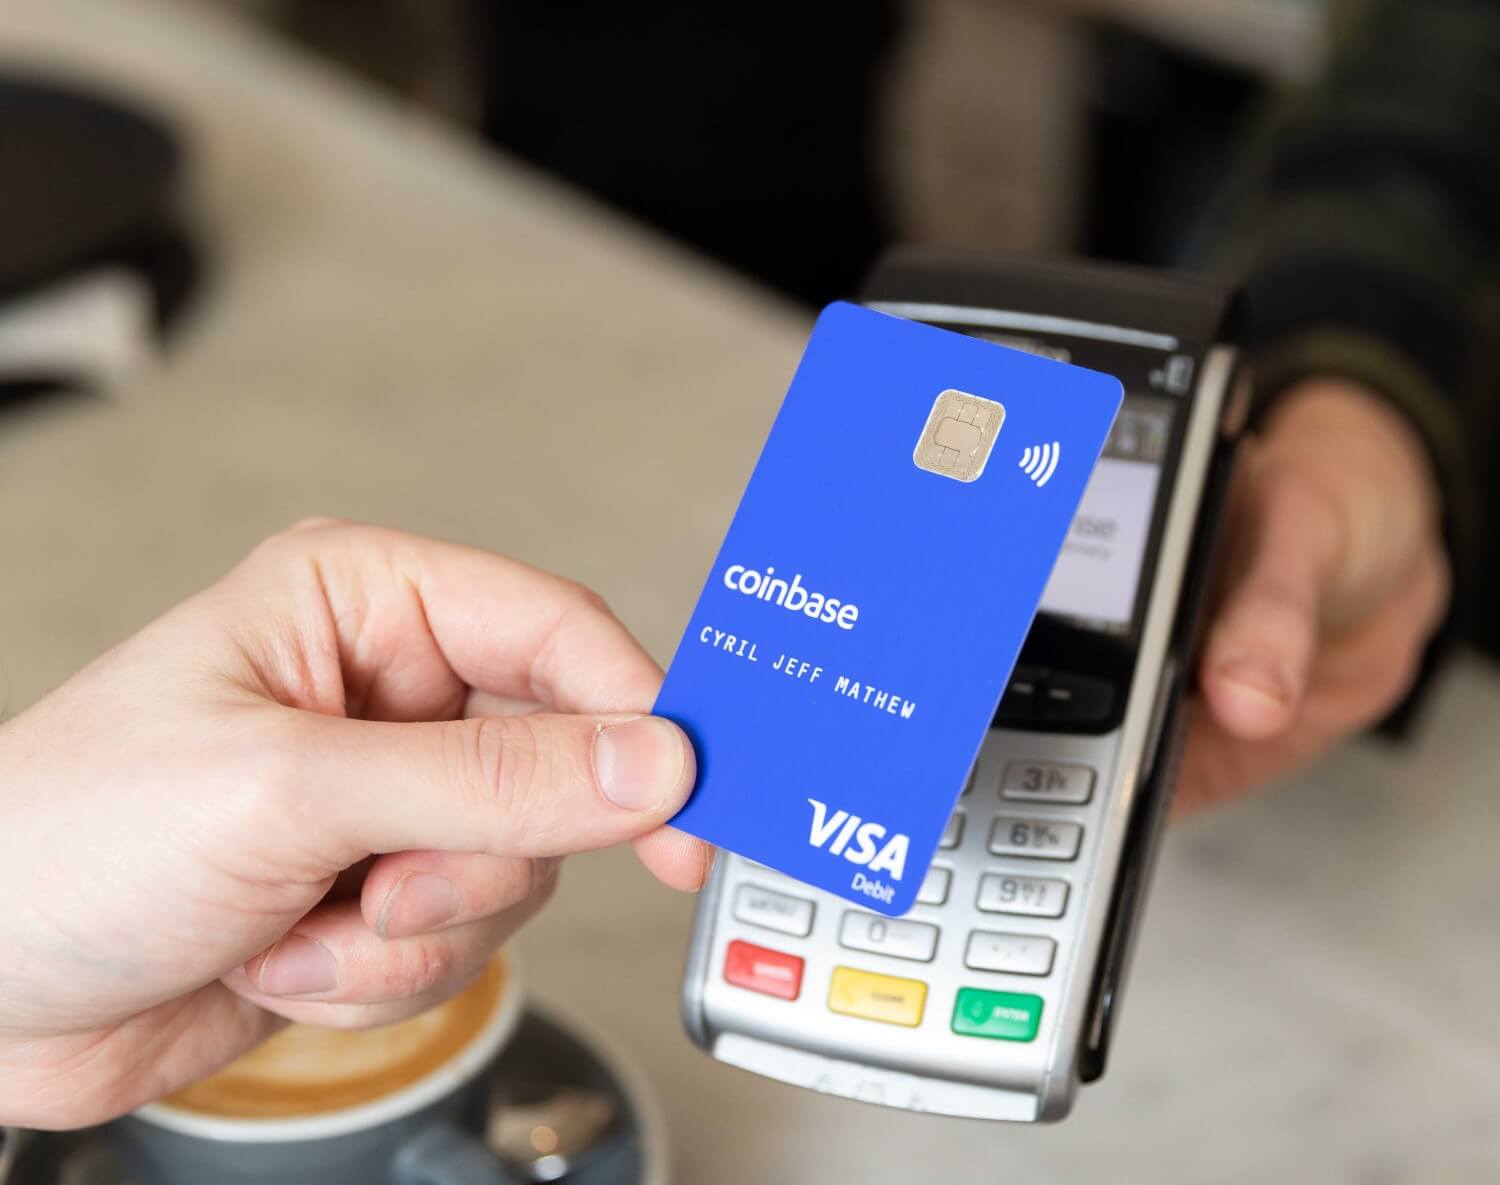 COINBASE LAUNCHED COINBASE VISA DEBIT CARD FOR UK AND EU USERS